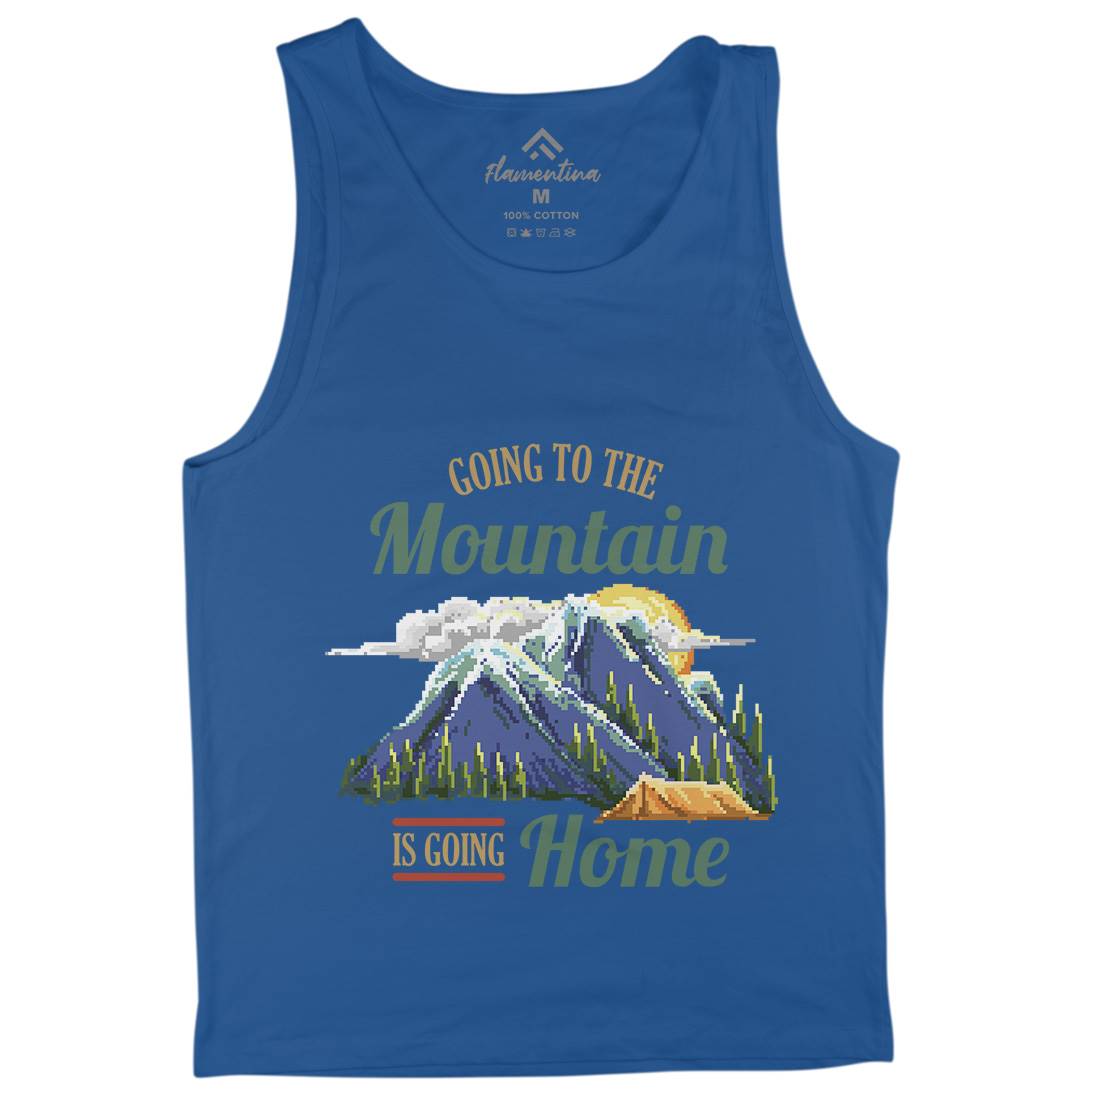 Going To The Mountain Mens Tank Top Vest Nature B905